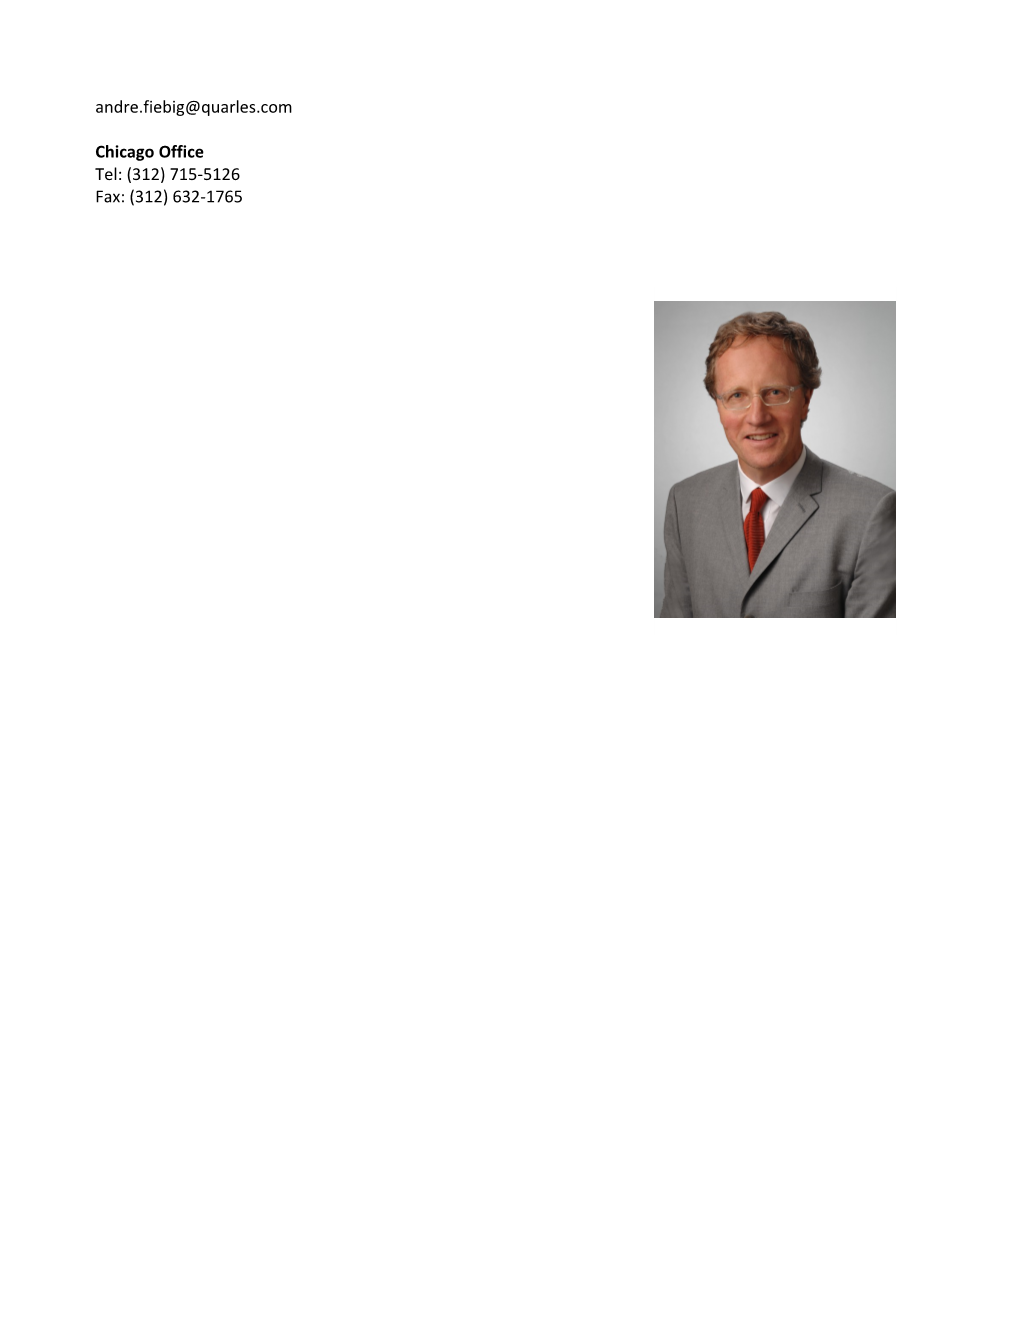 Andre Fiebig Focuses on Mergers & Acquisitions, Joint Ventures, Commercial Law and Antitrust